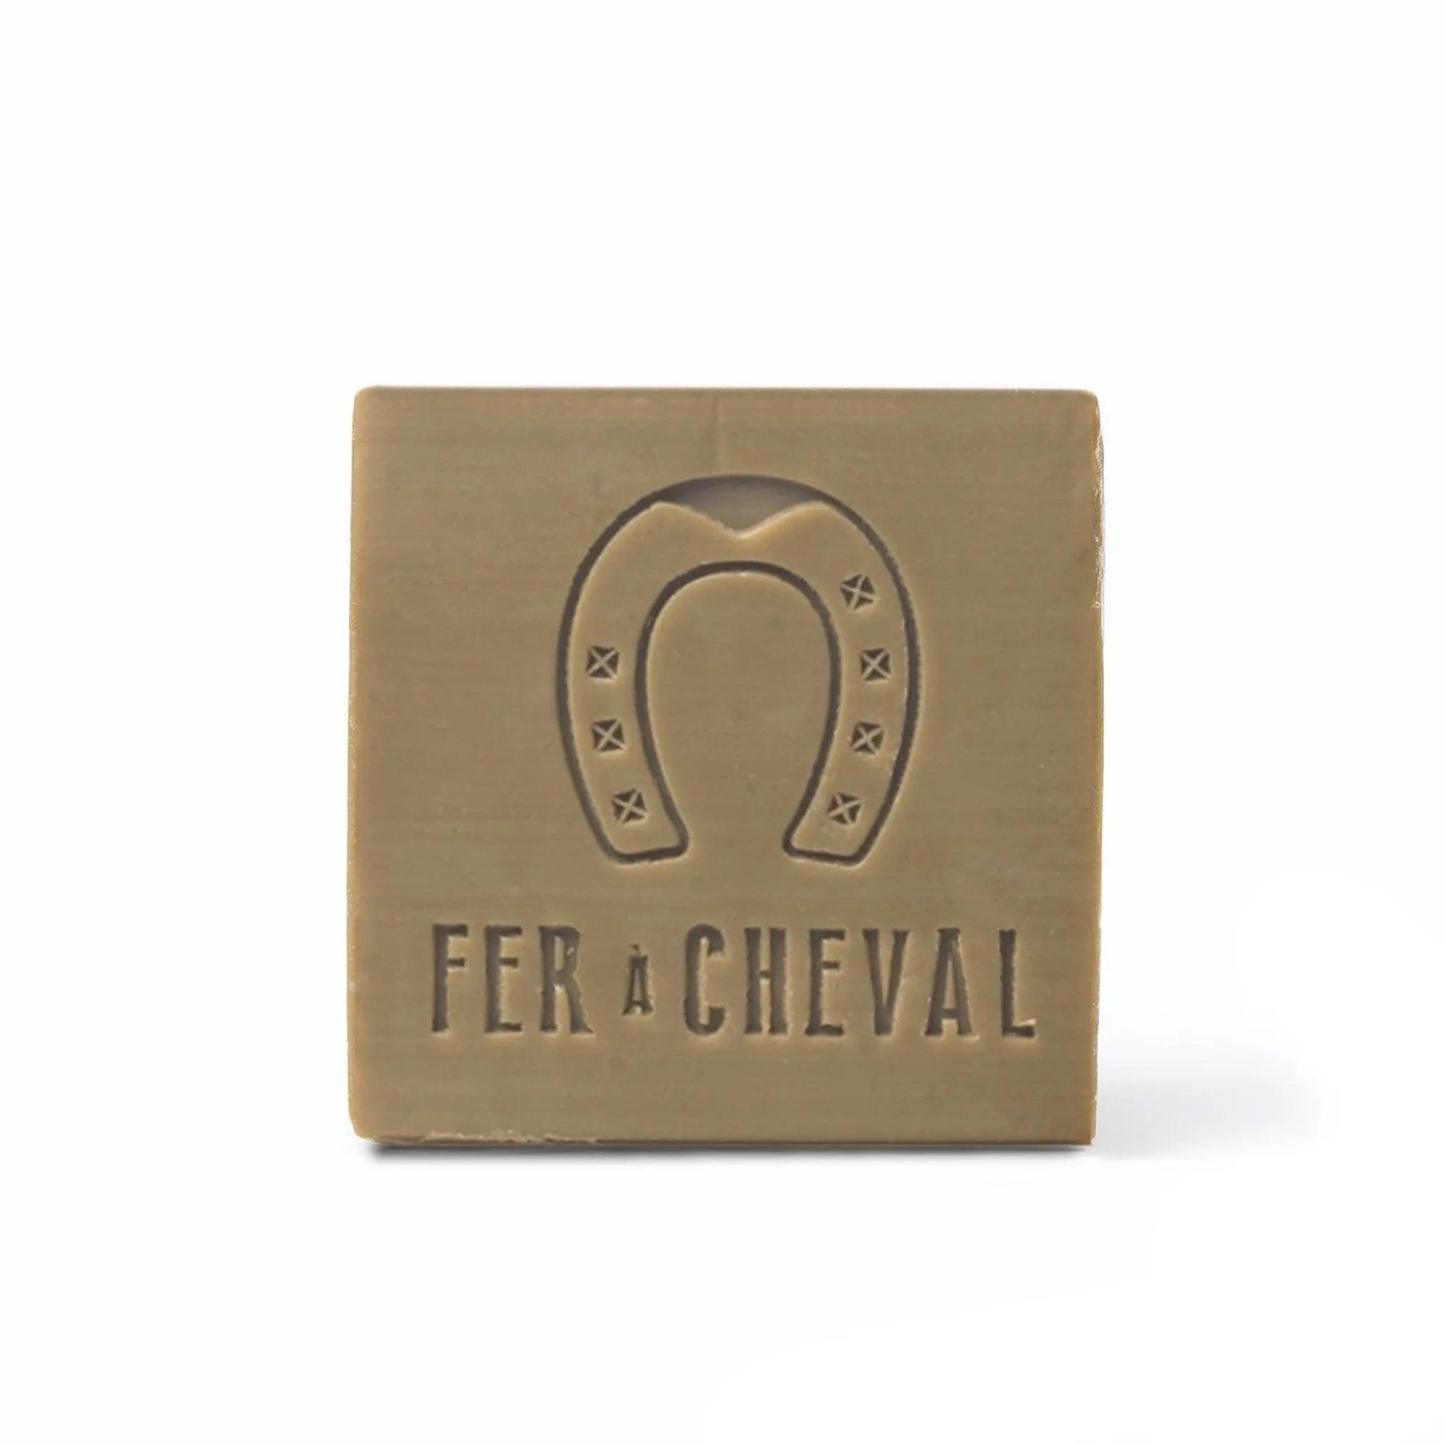 Fer A Cheval Pure Olive Slice Marseille Soap 65g by Love Nature